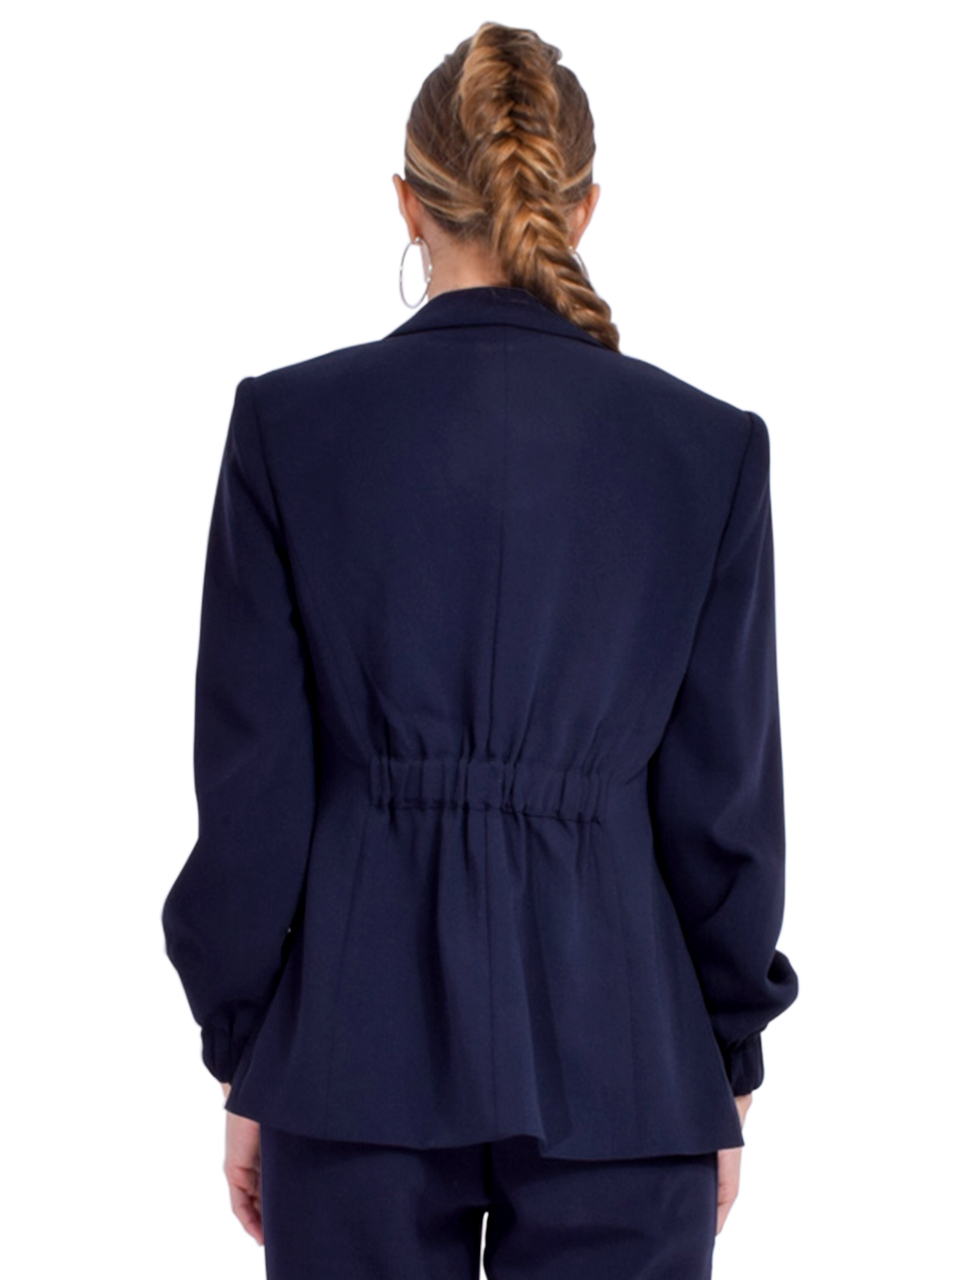 Cinq à Sept Tabitha Jacket in Navy Back View 